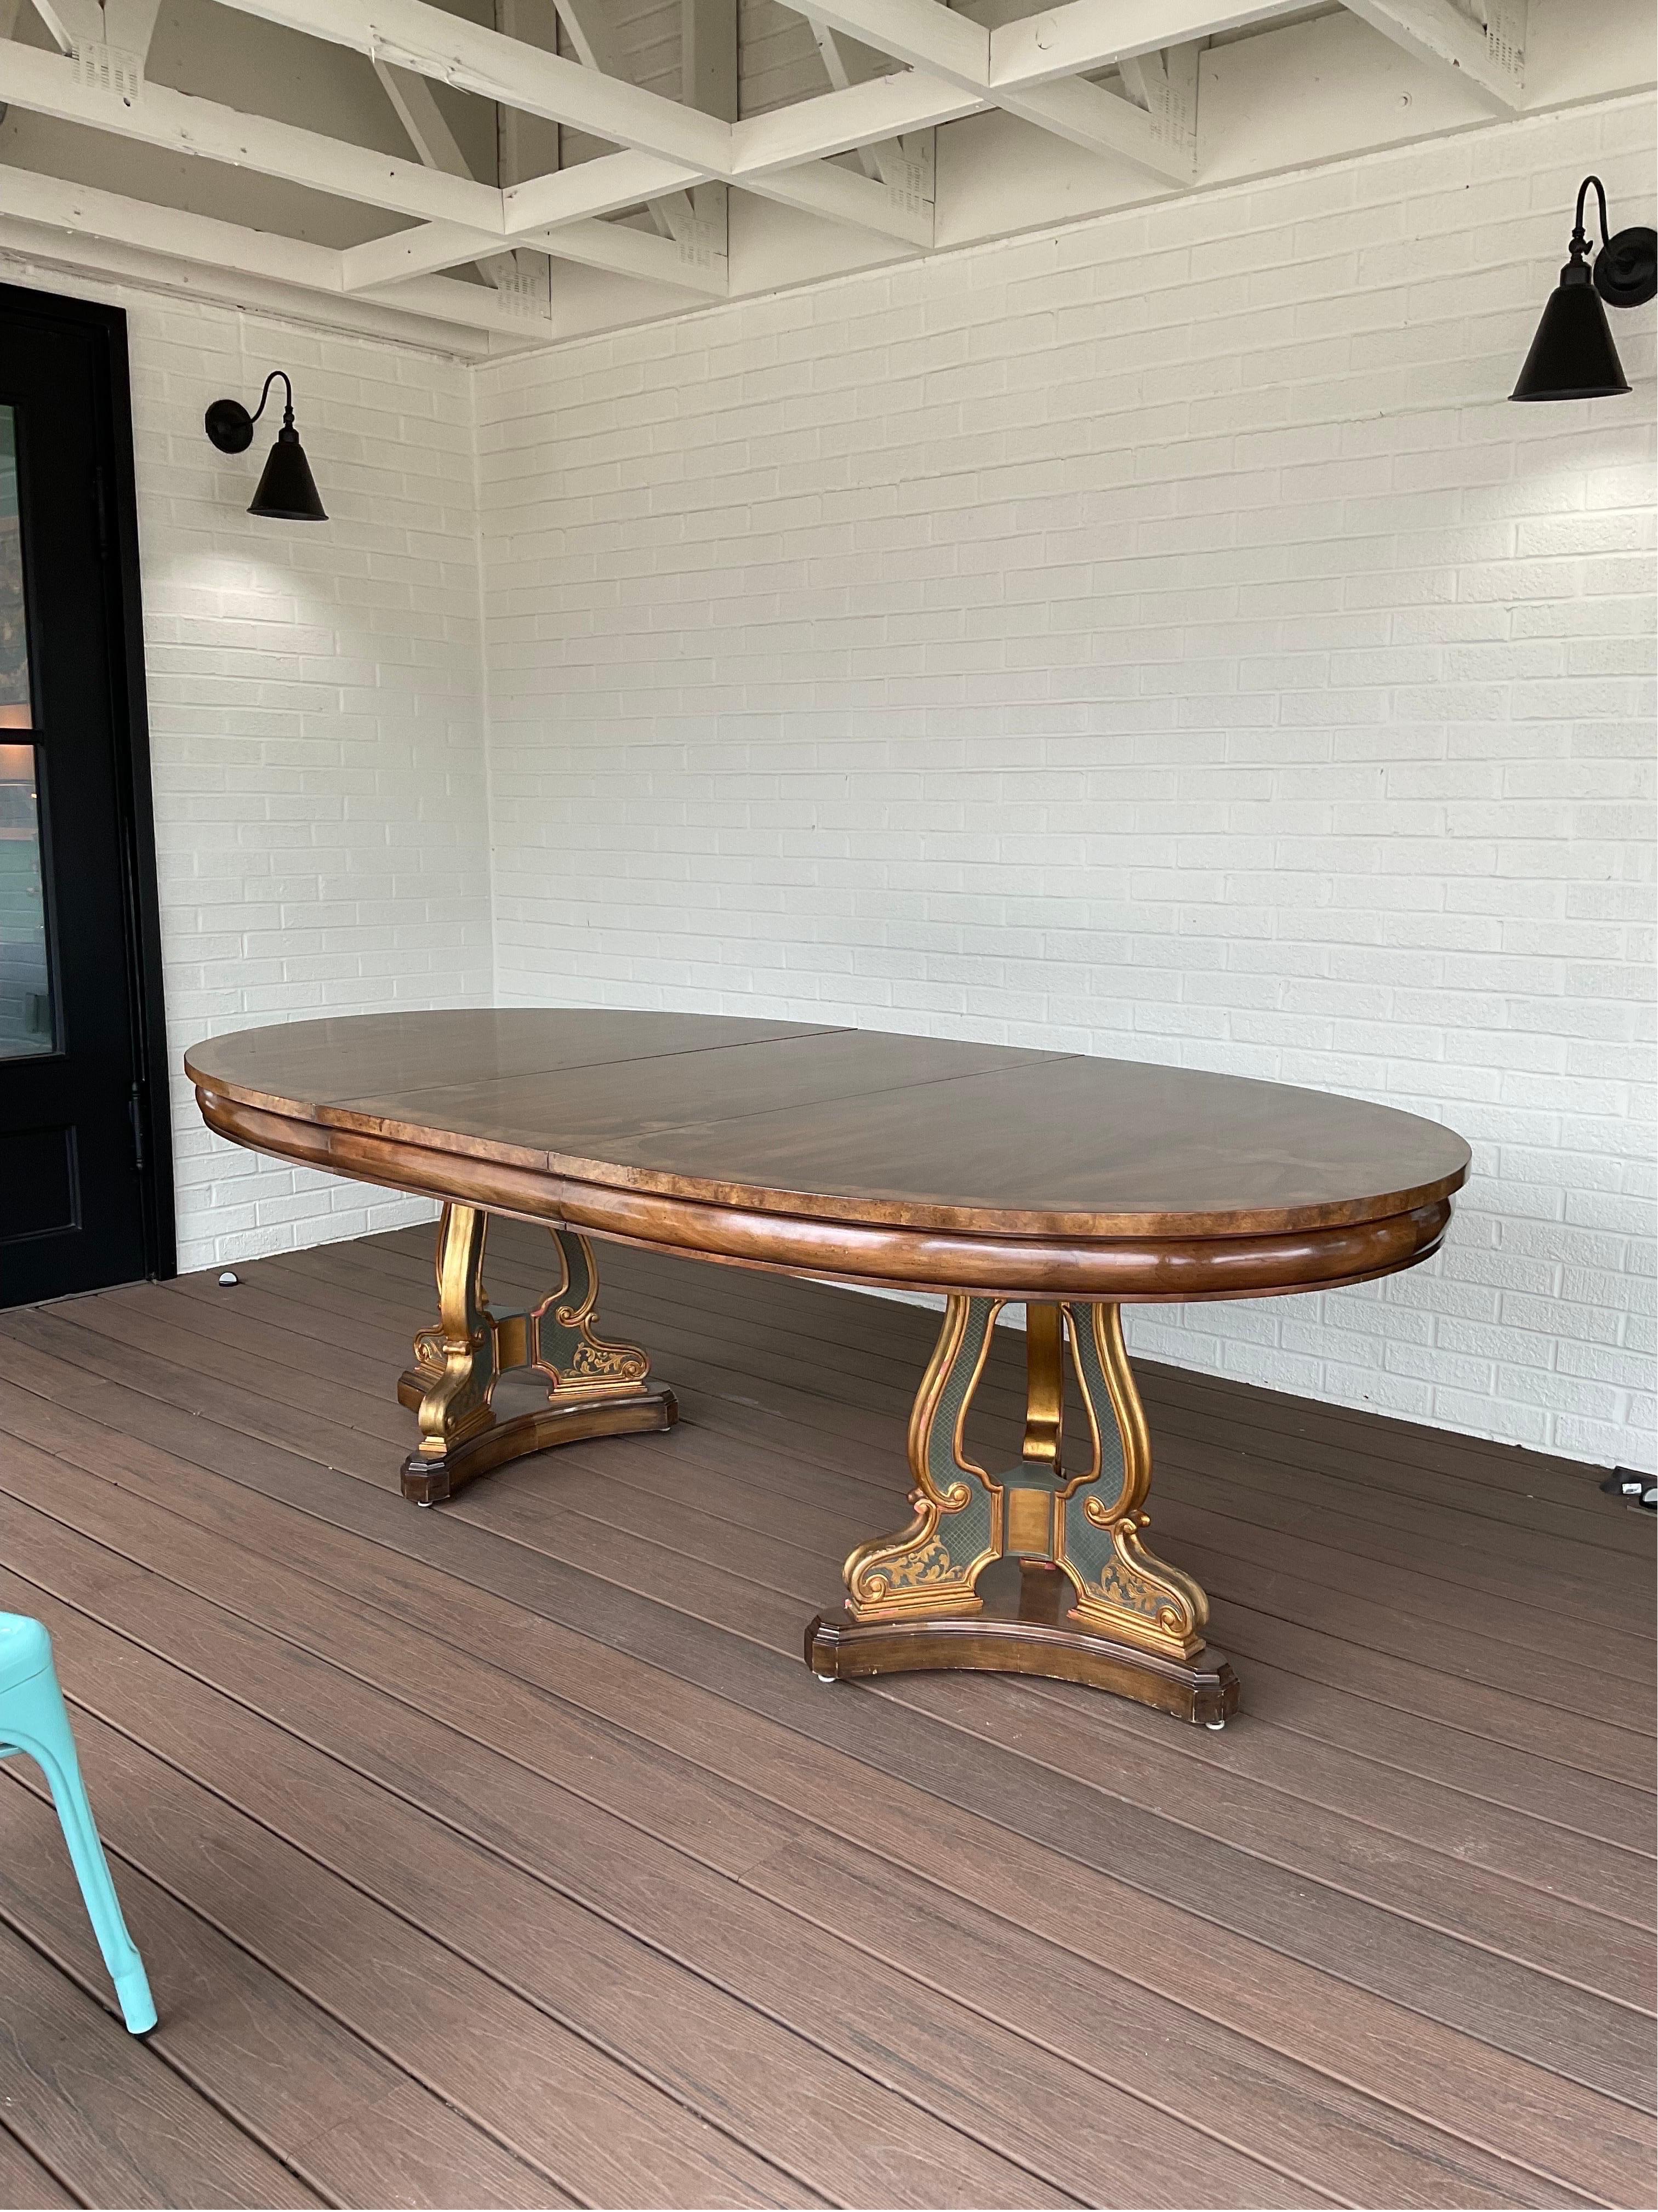 Spectacular Mastercraft Dining Table with two 20” leaves, both of which match perfectly with the tabletop. Rare to find this on vintage pieces. The tabletop with both leaves installed is brilliant. Just a stunning piece. The two pedestals that